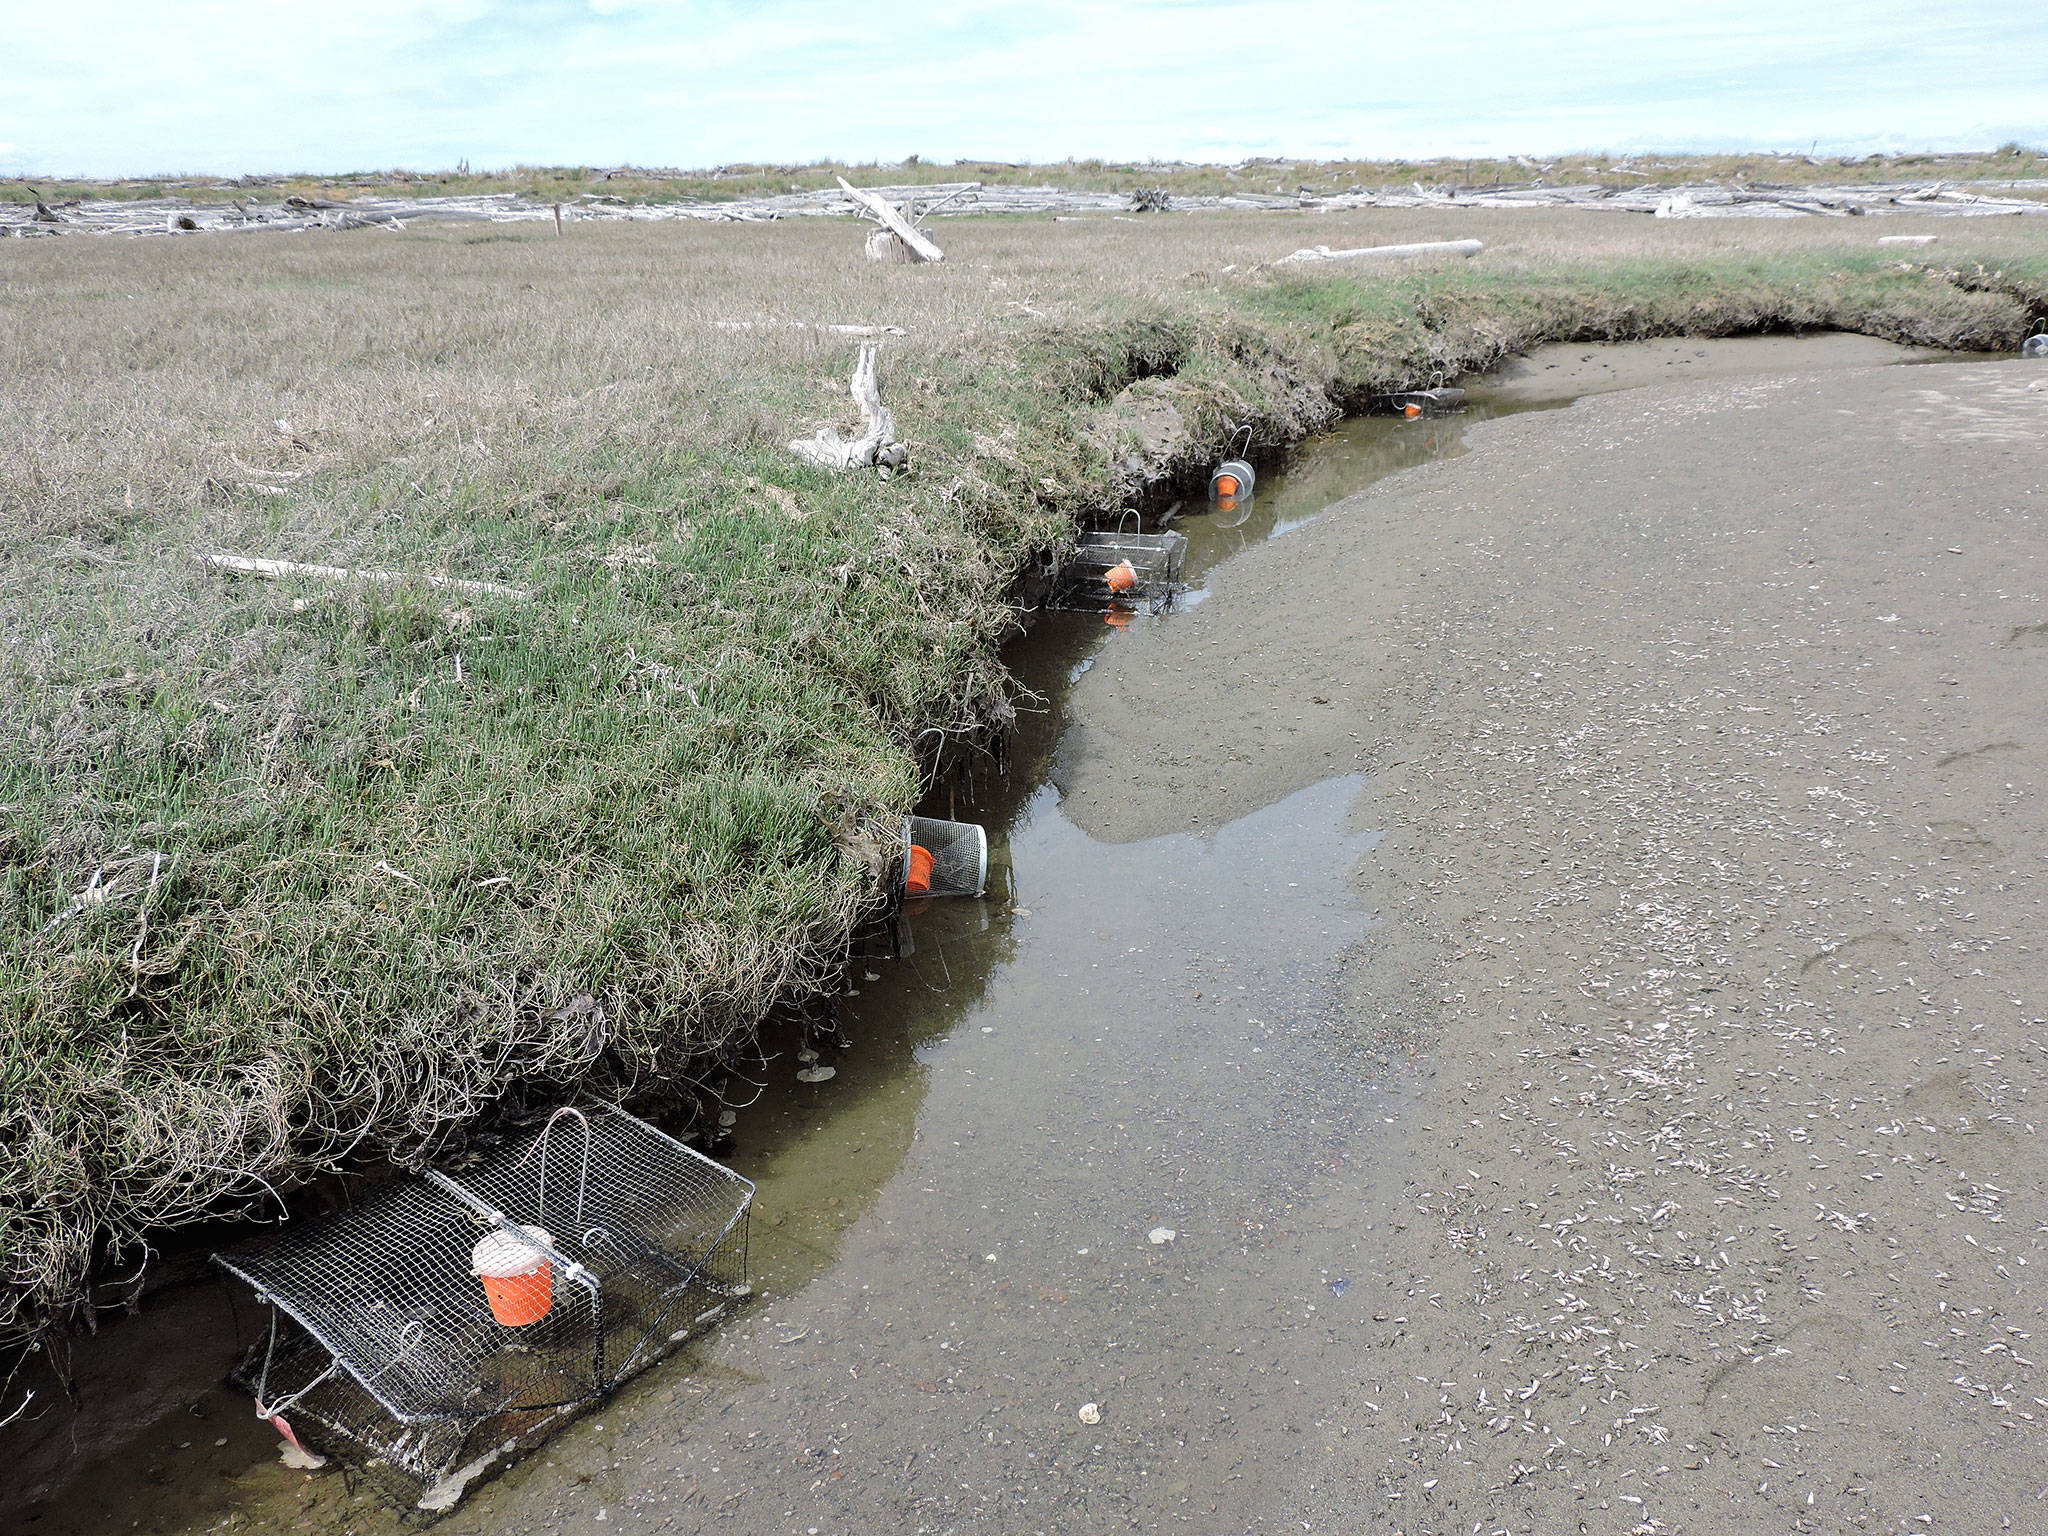 More than 100 traps have been placed on Dungeness Spit to capture European green crabs, considered one of the worst invasive species on the planet by scientists. (Lorenz Sollmann/Washington Maritime National Wildlife Refuge)